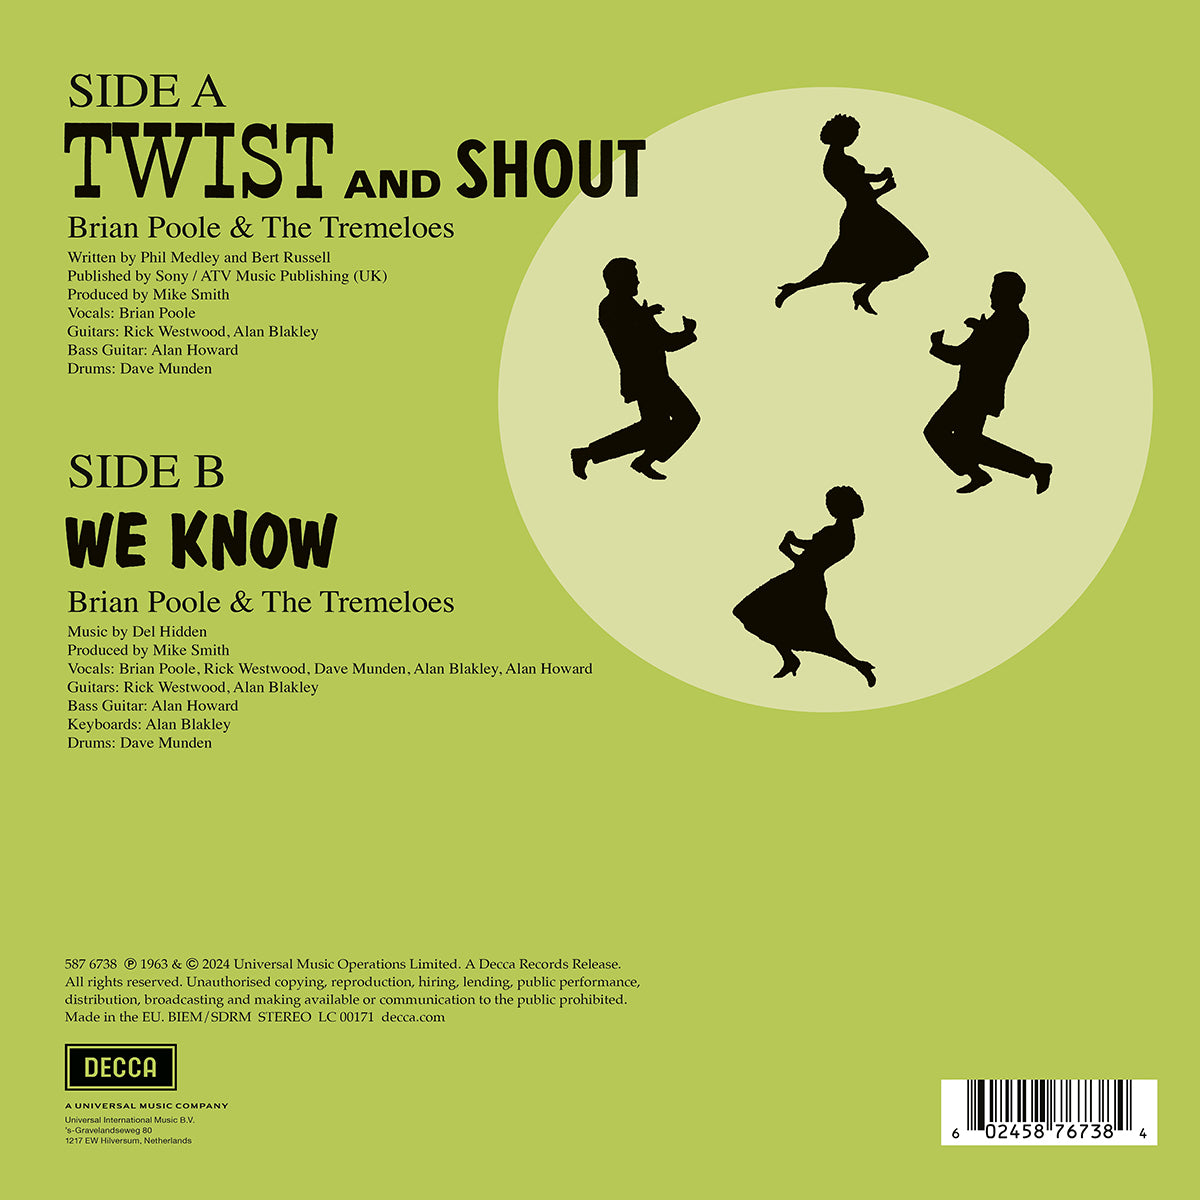 Brian Poole & The Tremeloes - Twist & Shout: Limited Clear Vinyl 7" Single [RSD24]